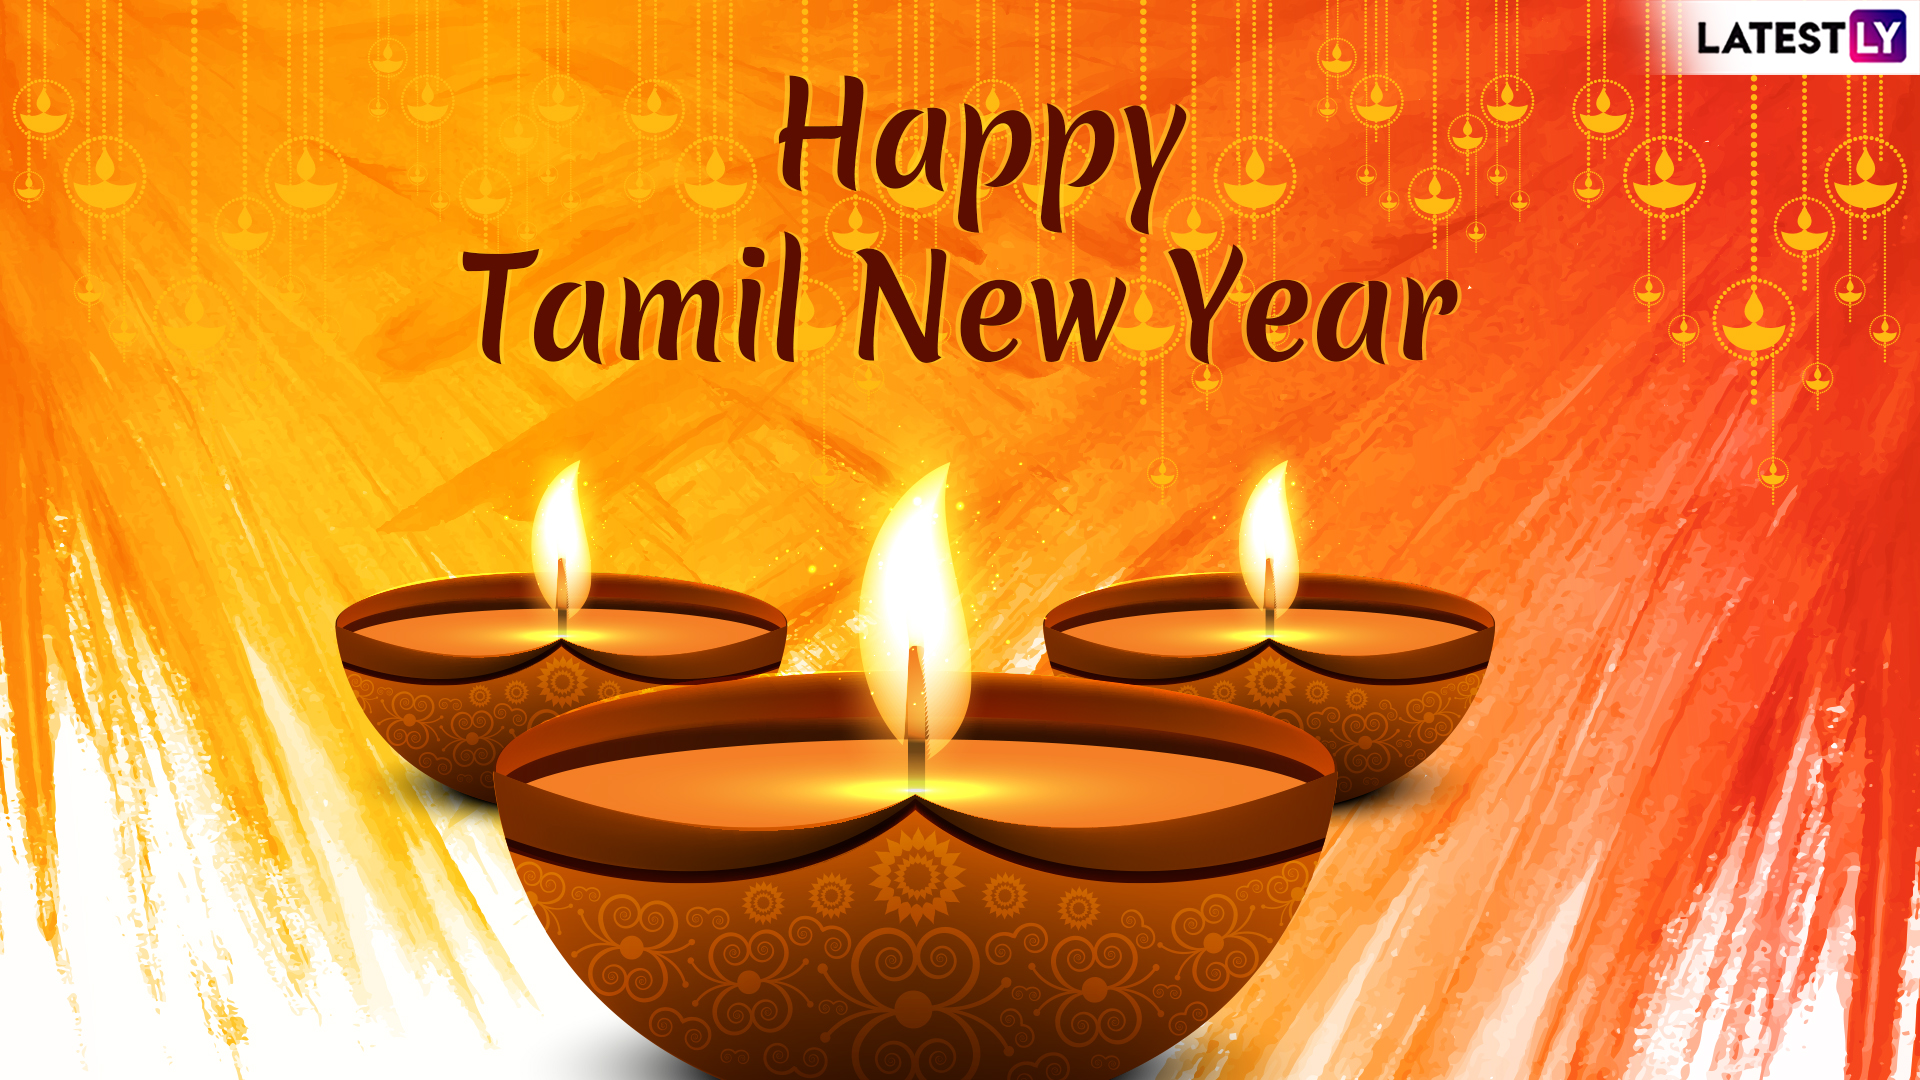 Whatsapp Message Reads - Tamil New Year 2019 , HD Wallpaper & Backgrounds